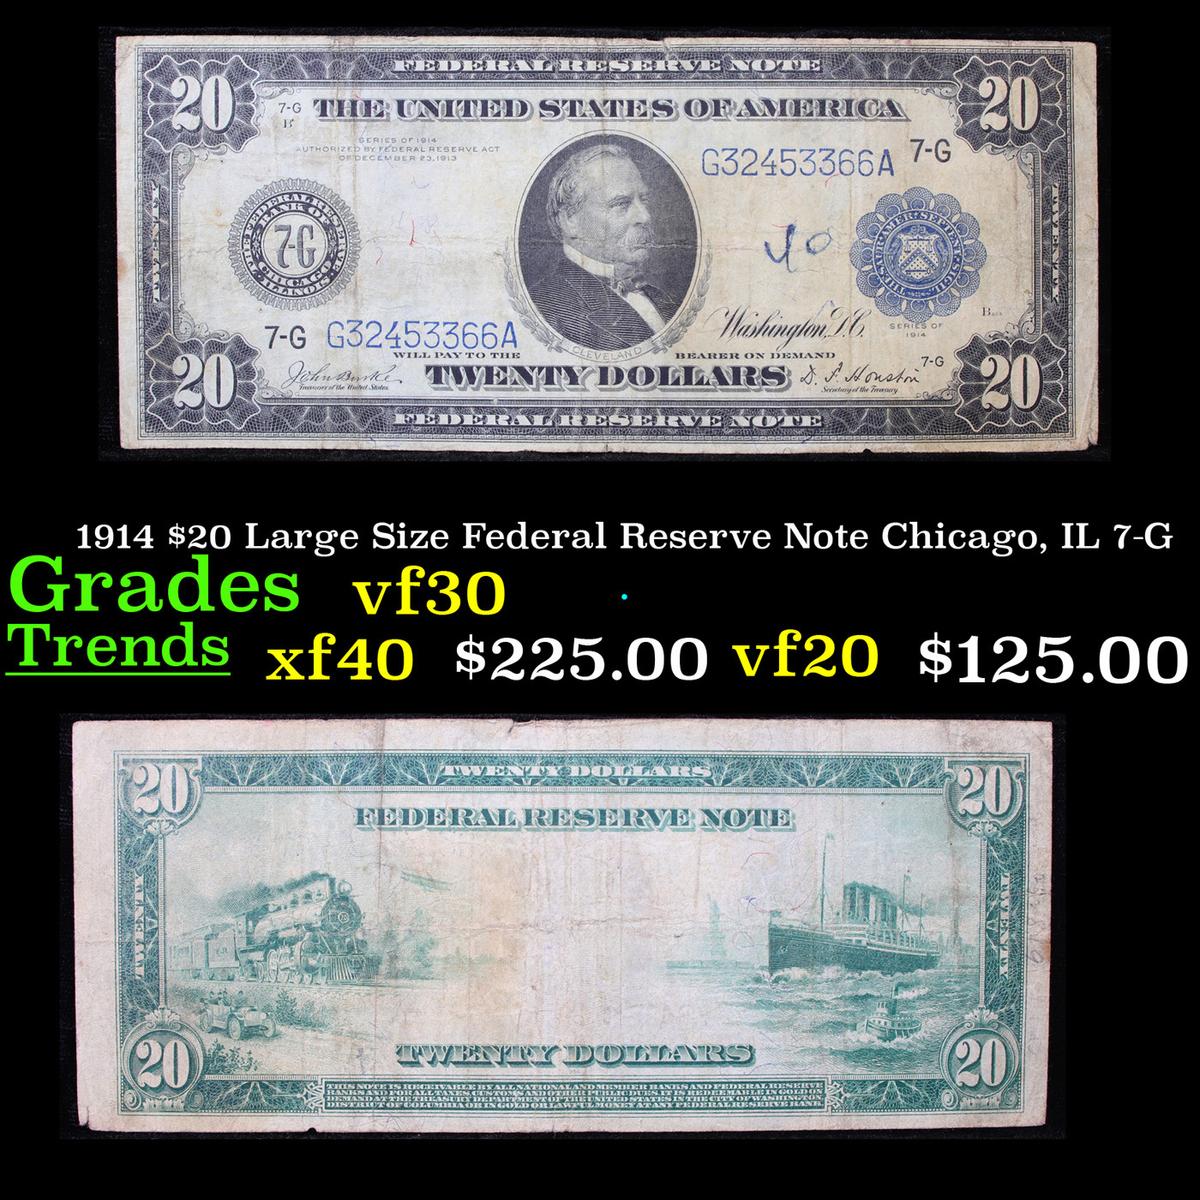 1914 $20 Large Size Federal Reserve Note Chicago, IL 7-G Grades vf++